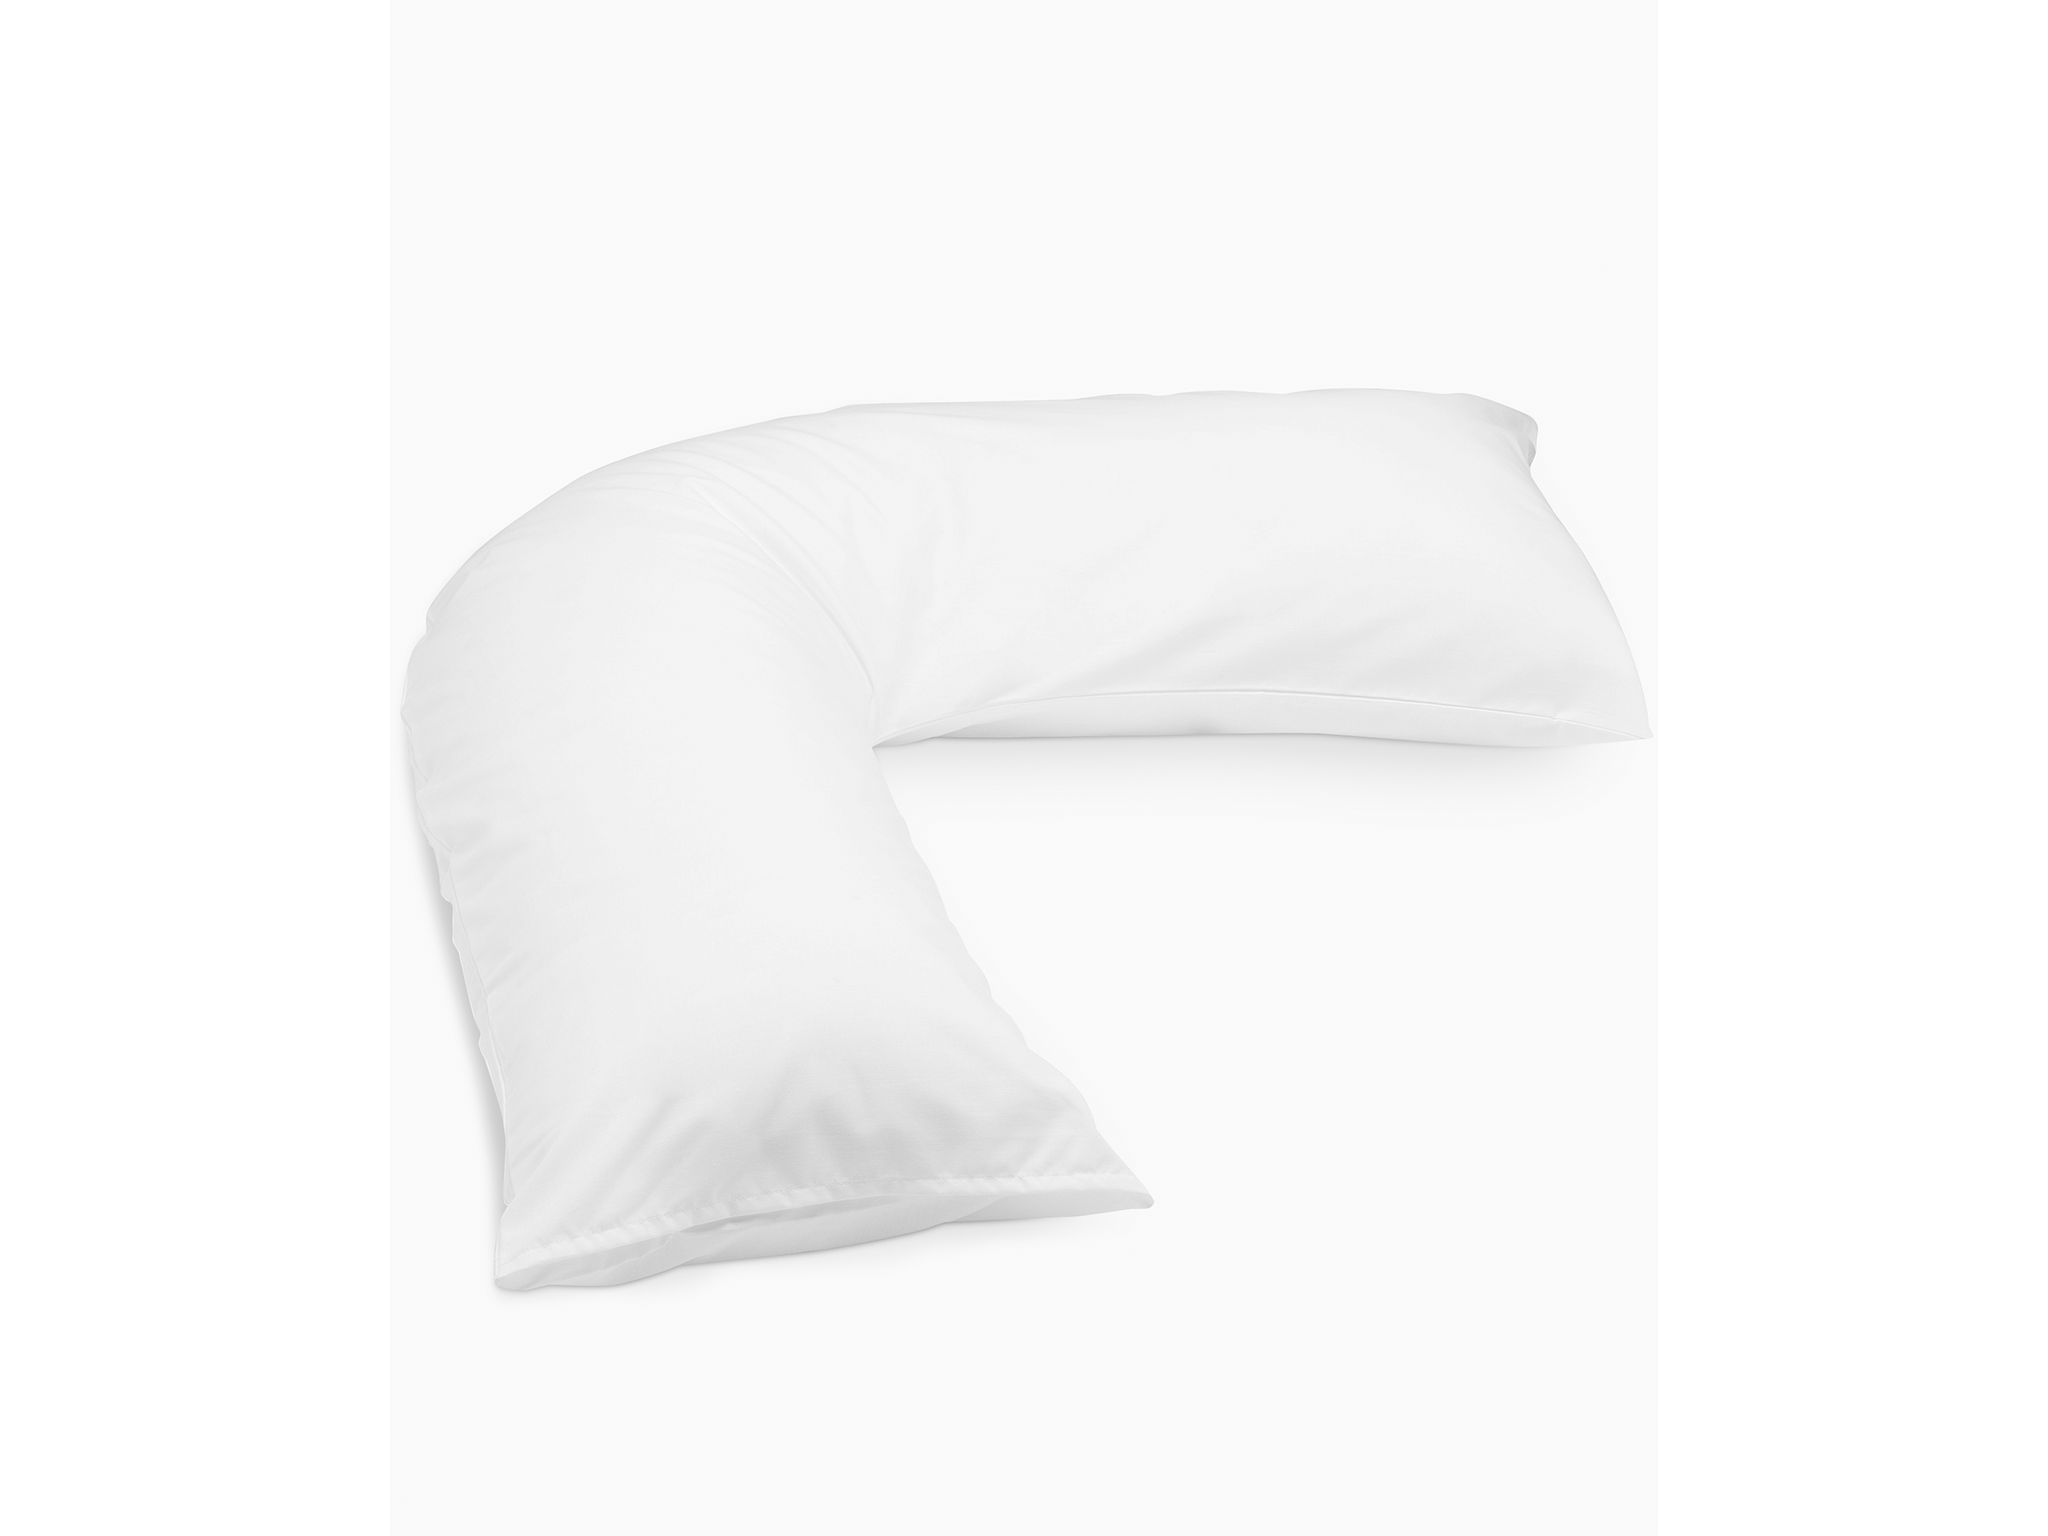 M&S medium V-shaped pillow with pillowcase